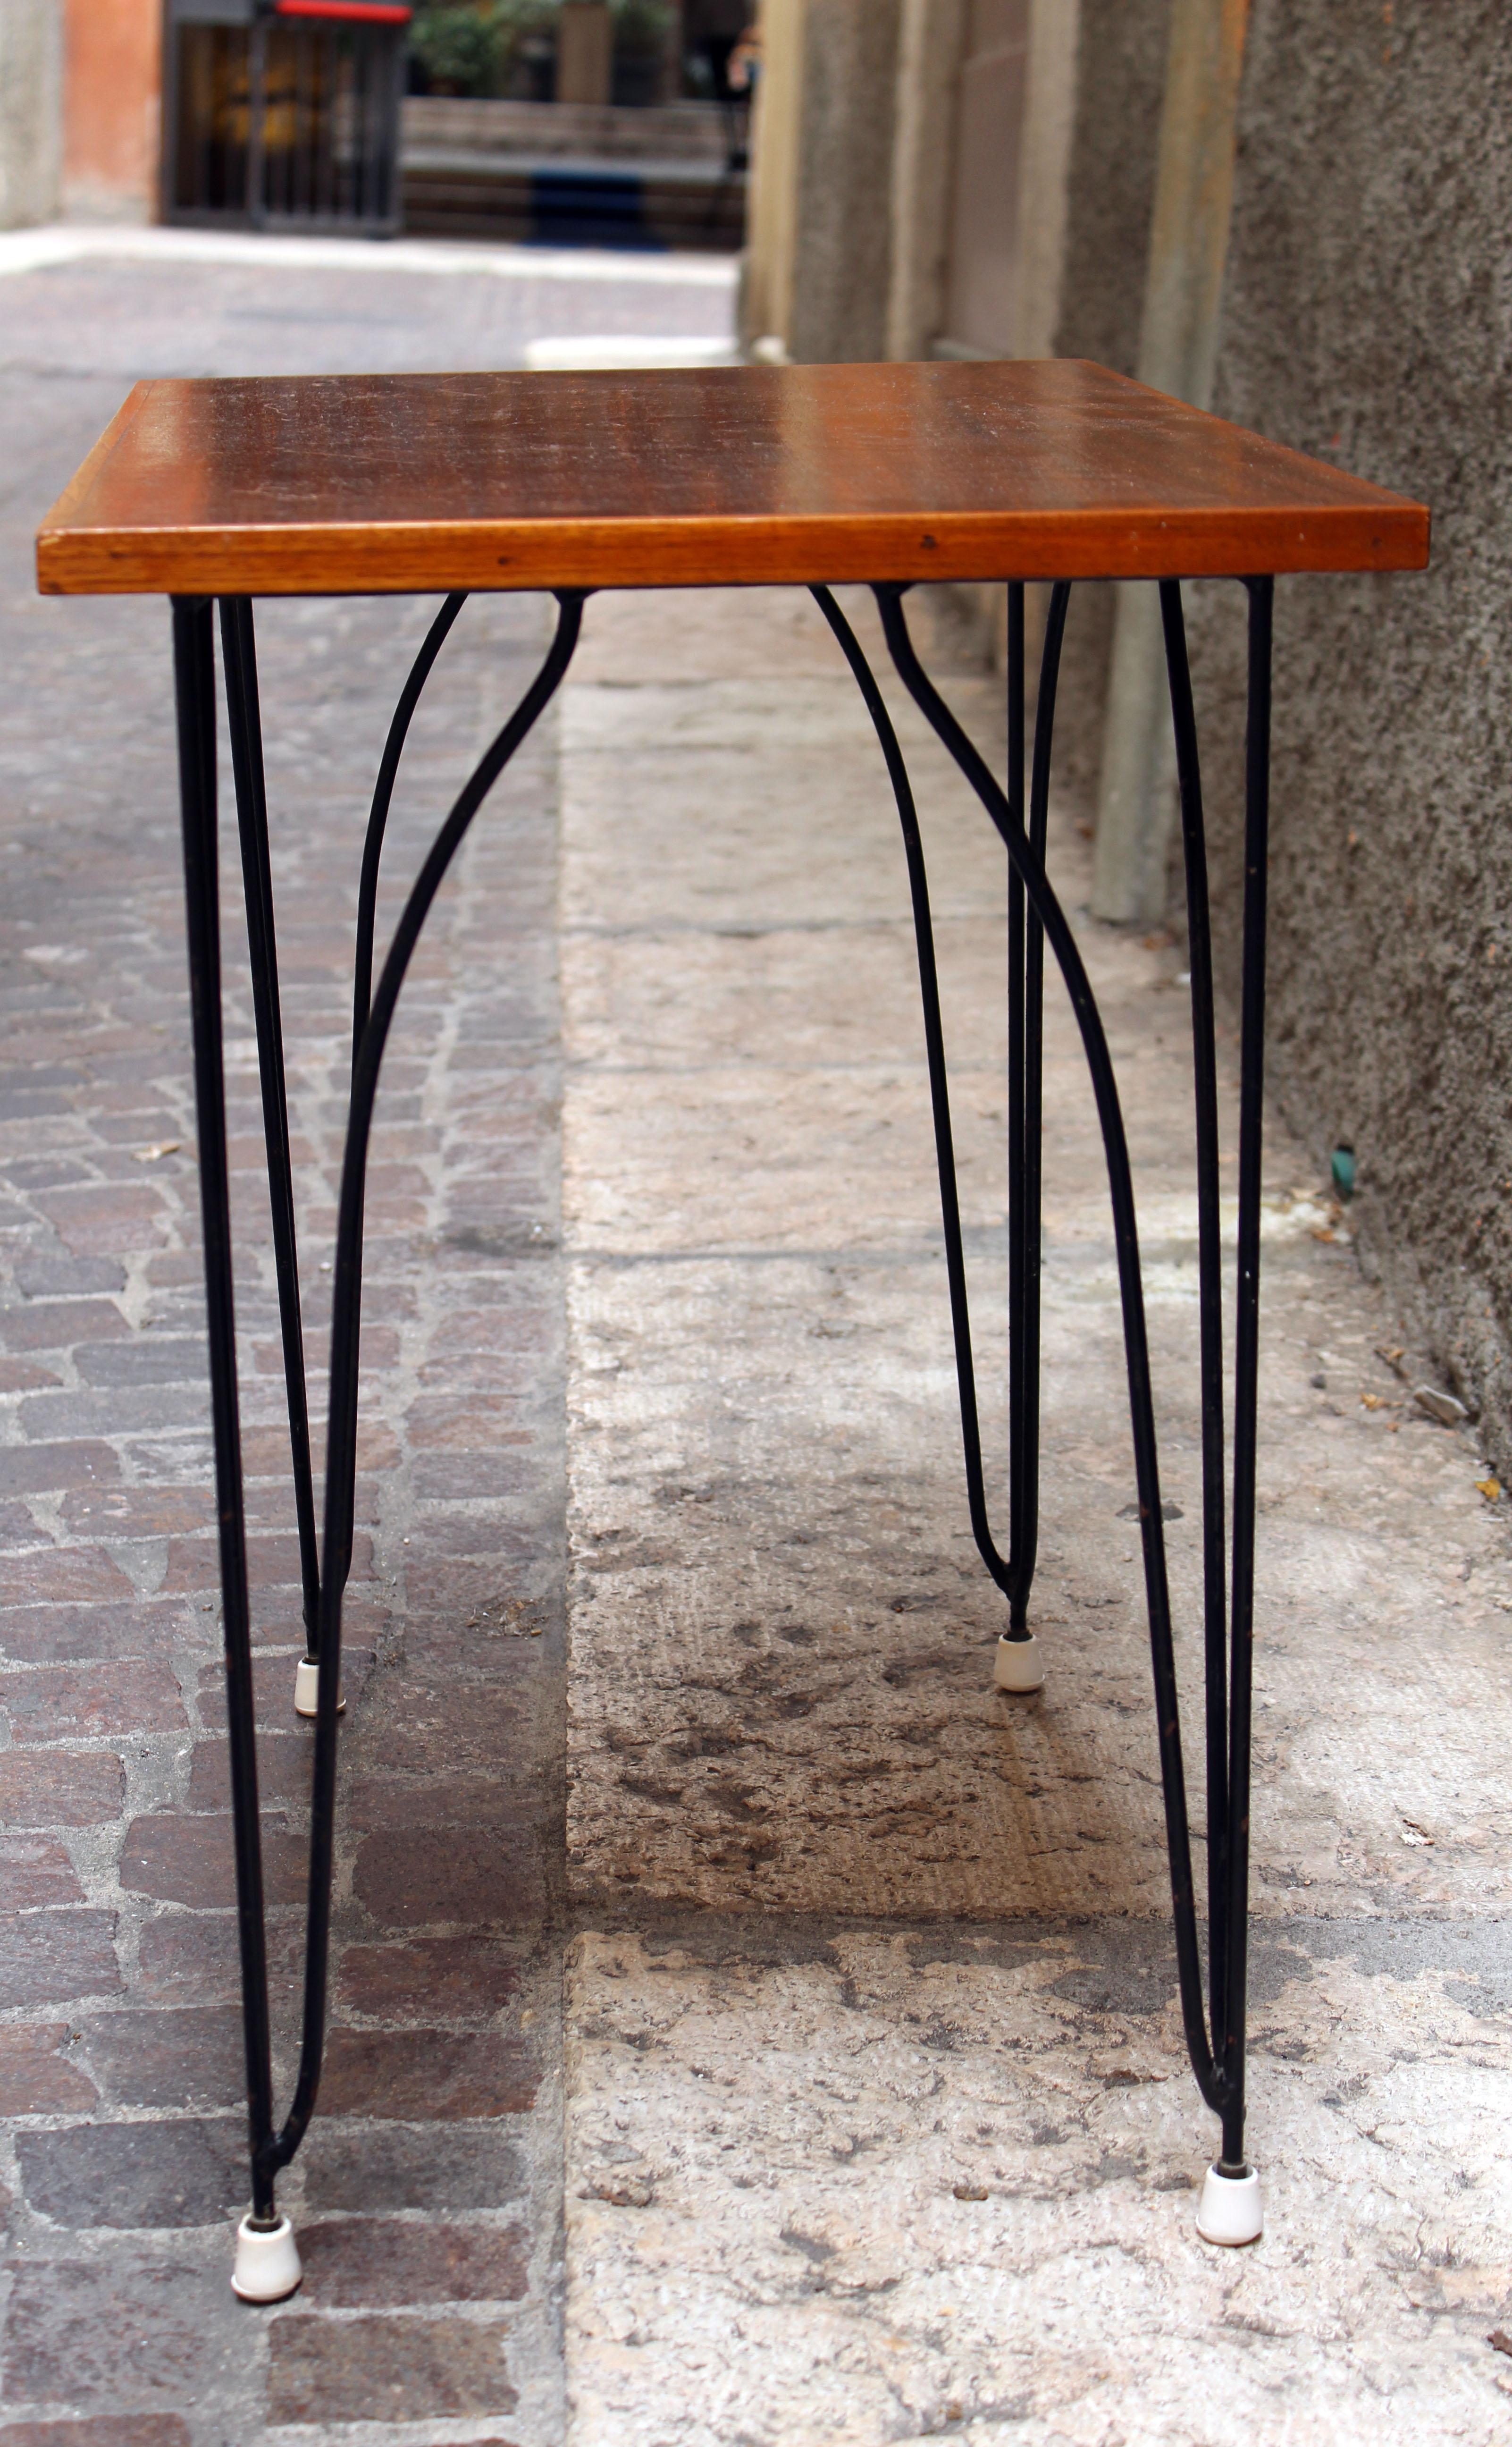 Coffee table made of wood and iron.
Made in Italy, circa 1960.